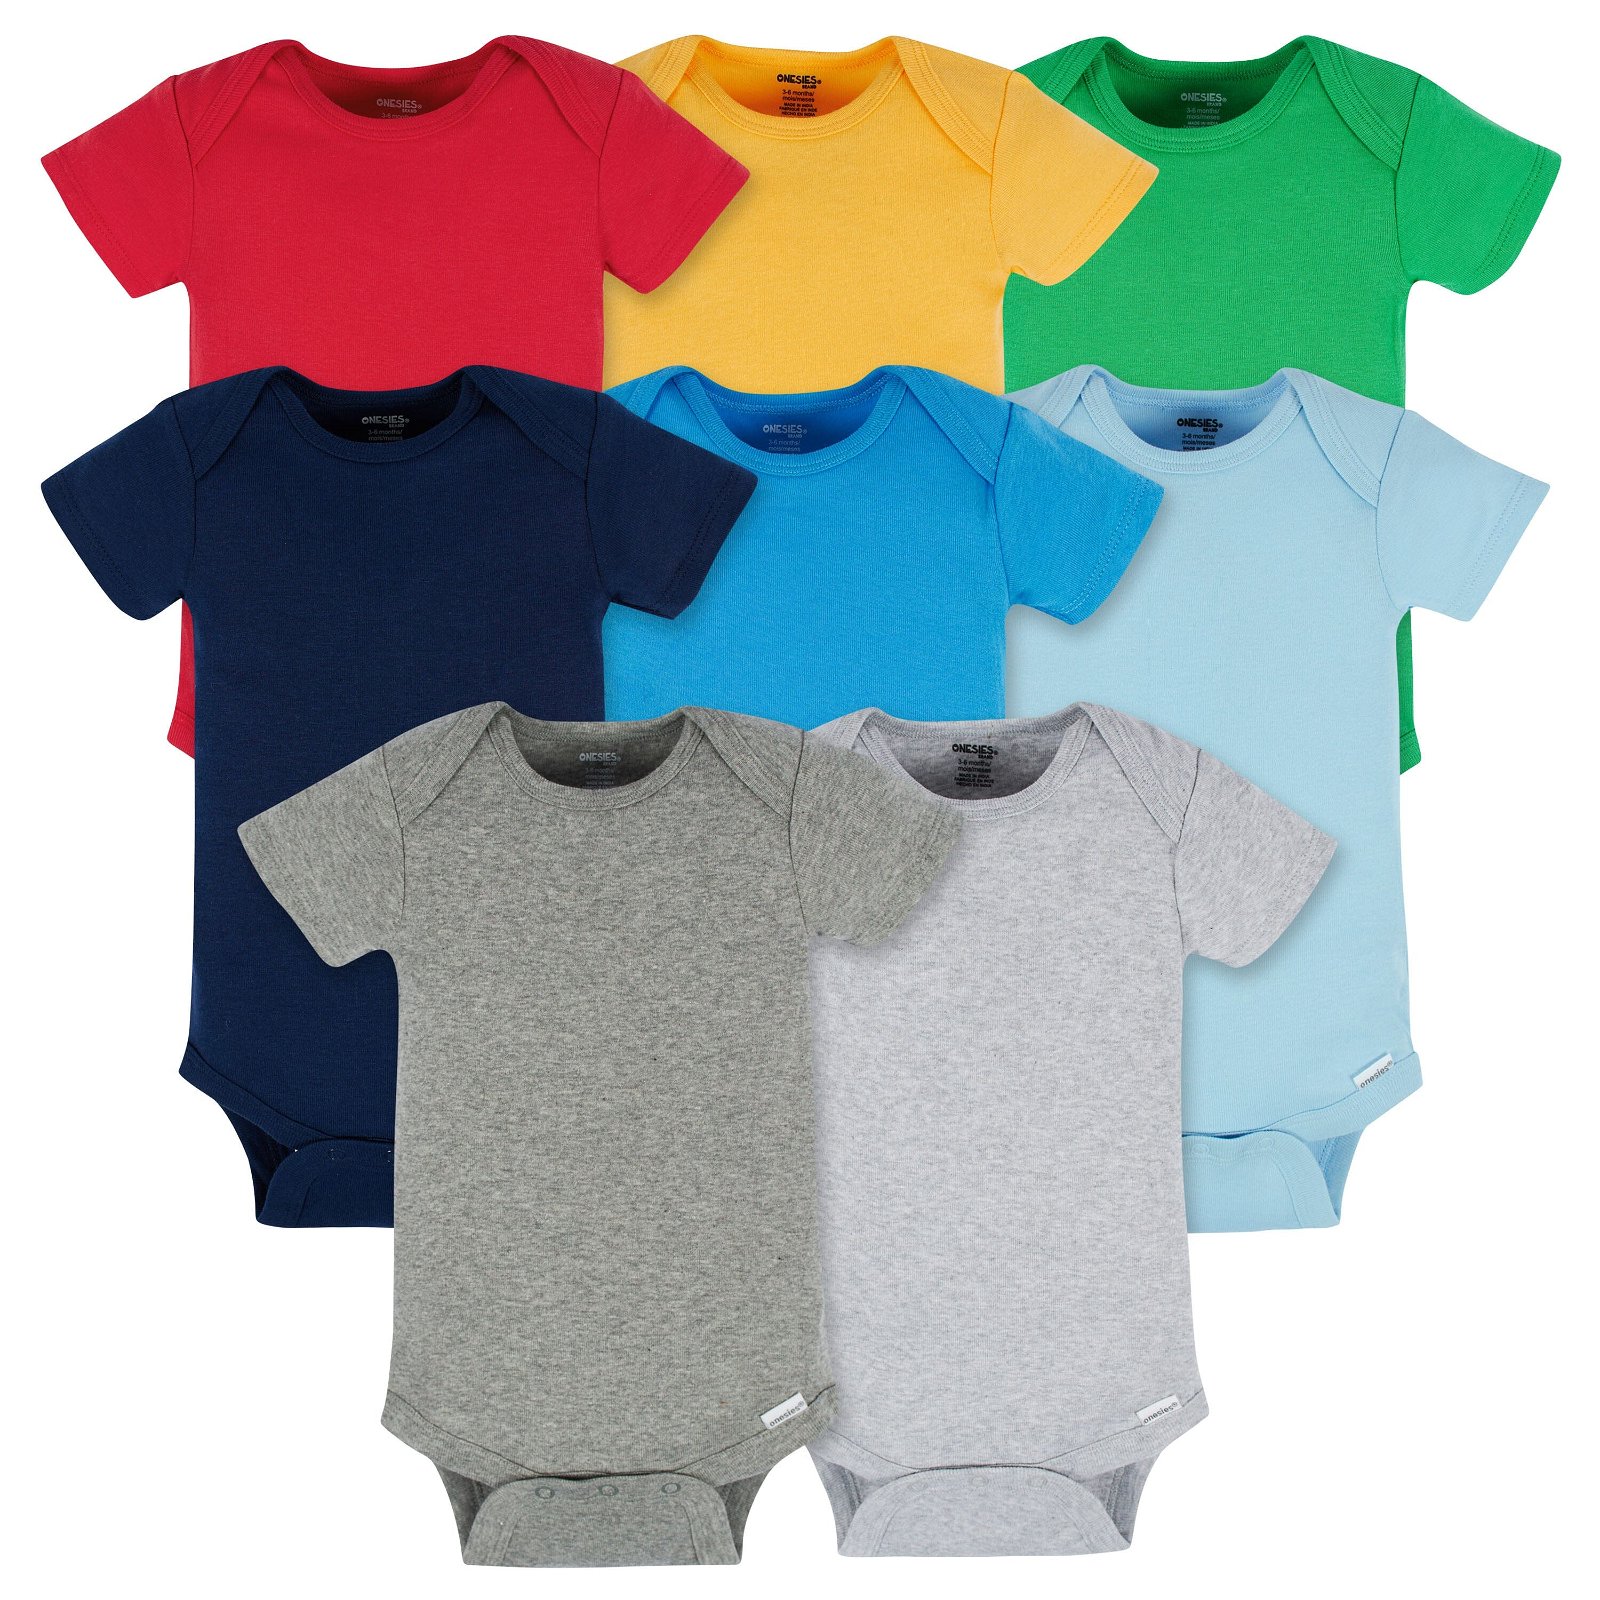 Image of 8-Pack Baby Neutral Classic Rainbow Short Sleeve Onesies® Bodysuits